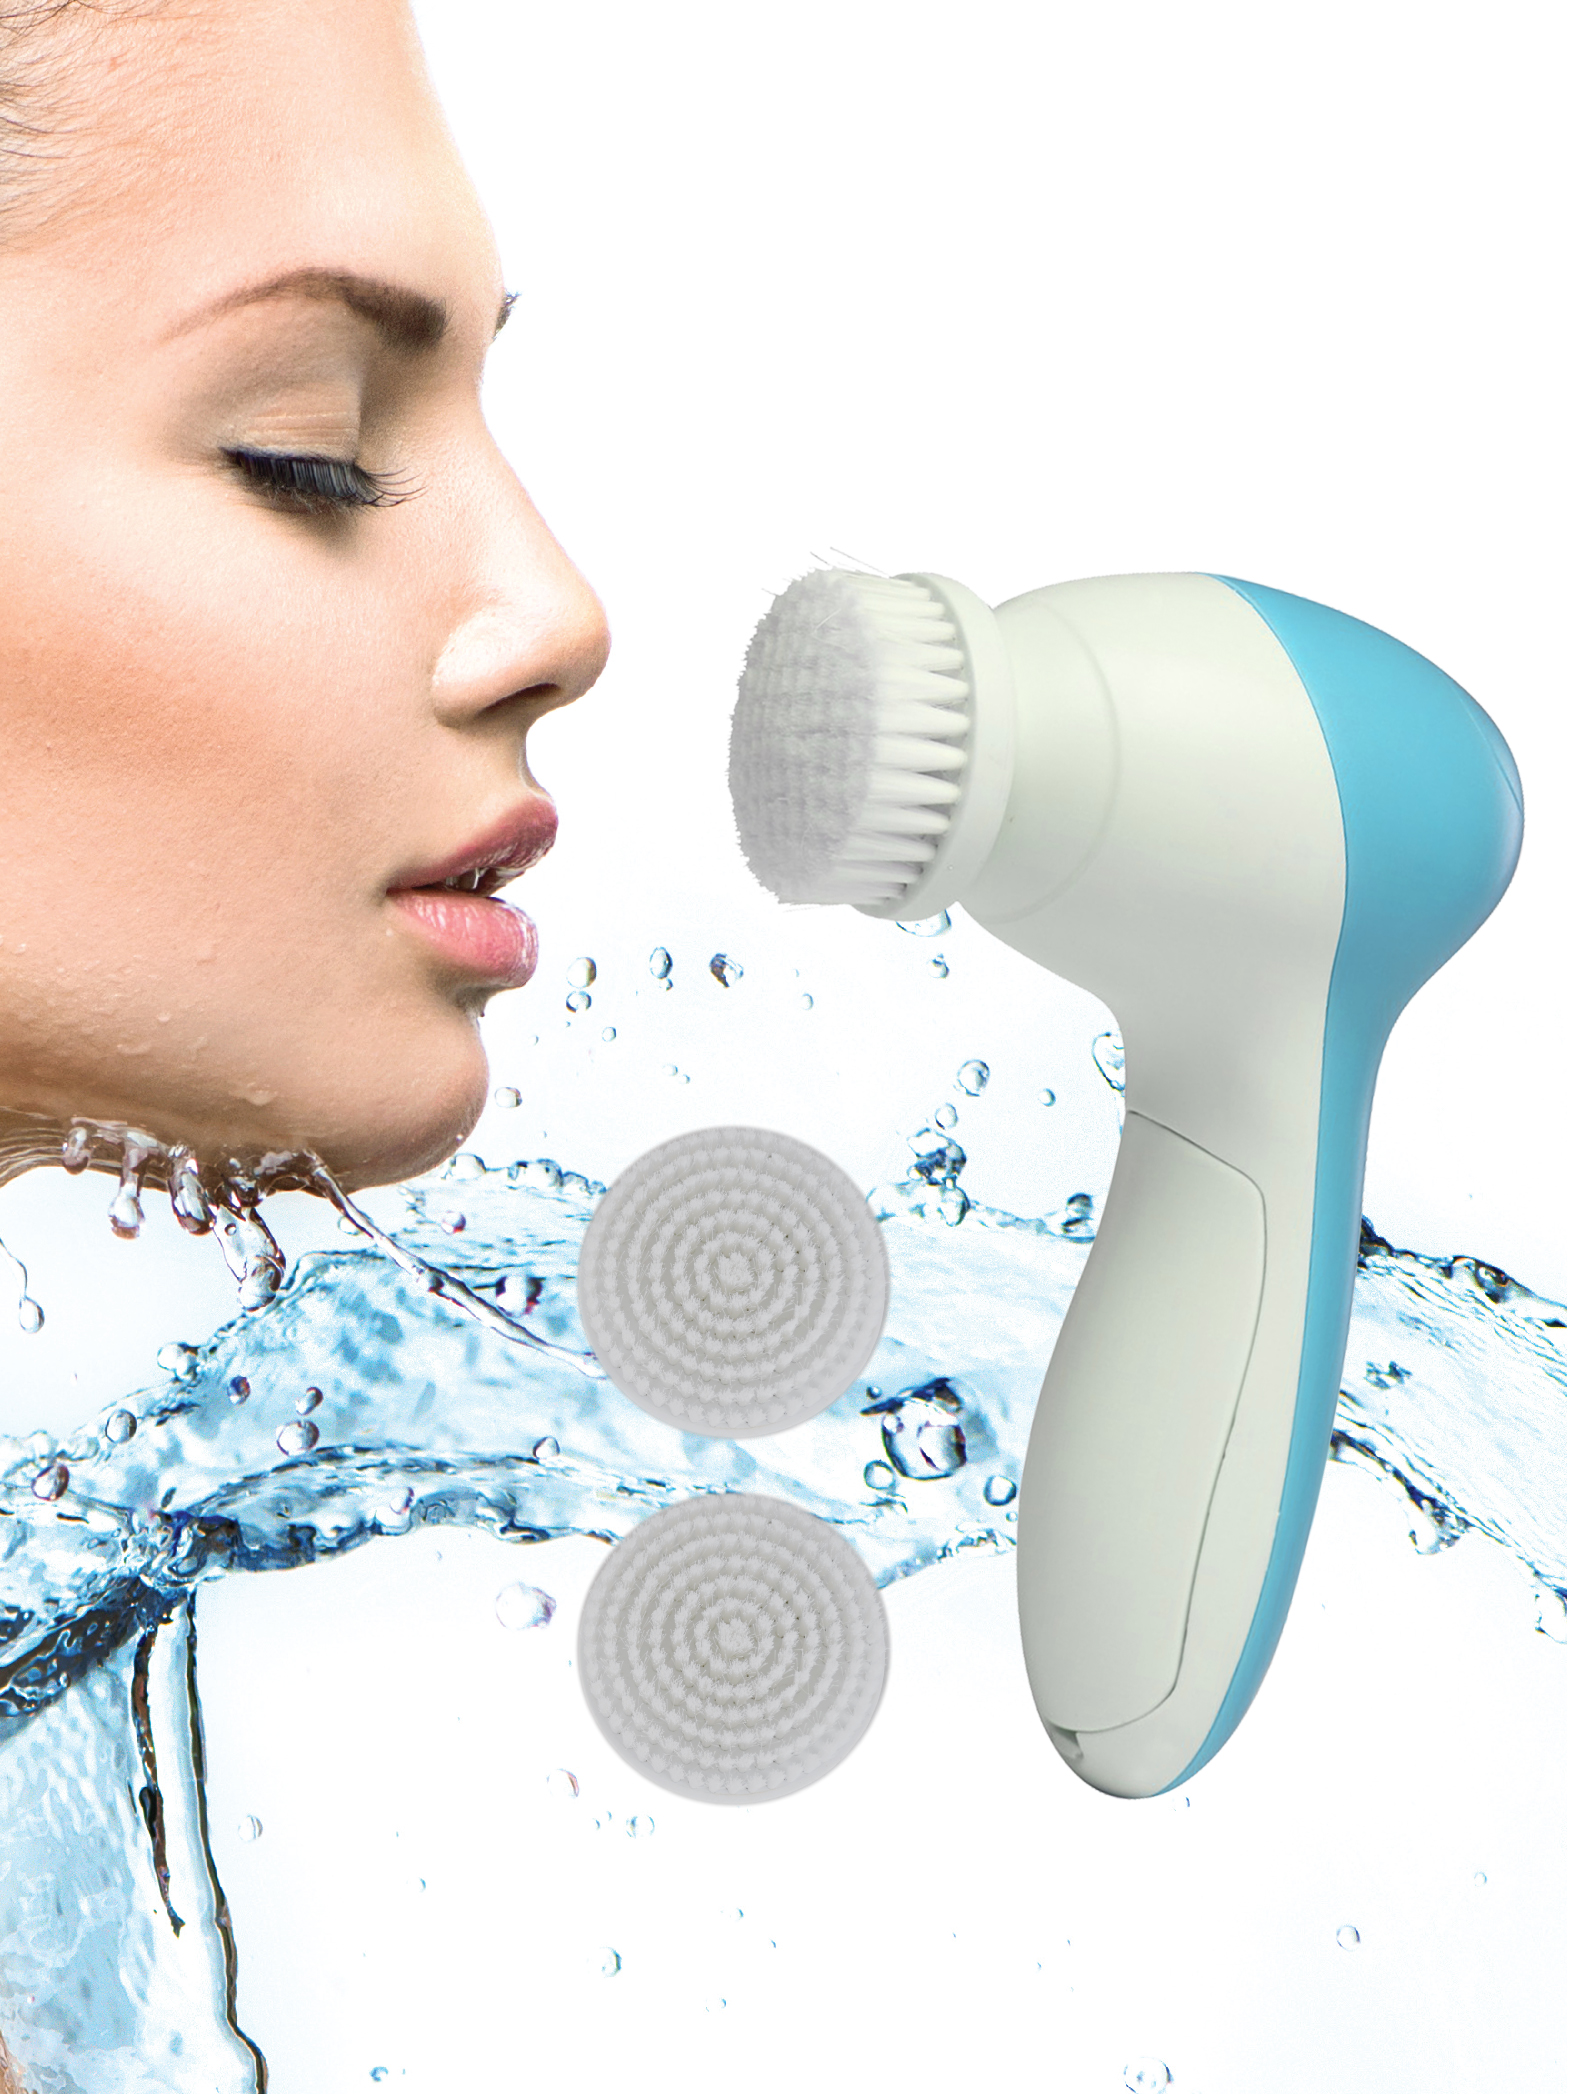 REVELÉ™ Exfoliating Facial Cleansing Brush by Donnamax, Inc.